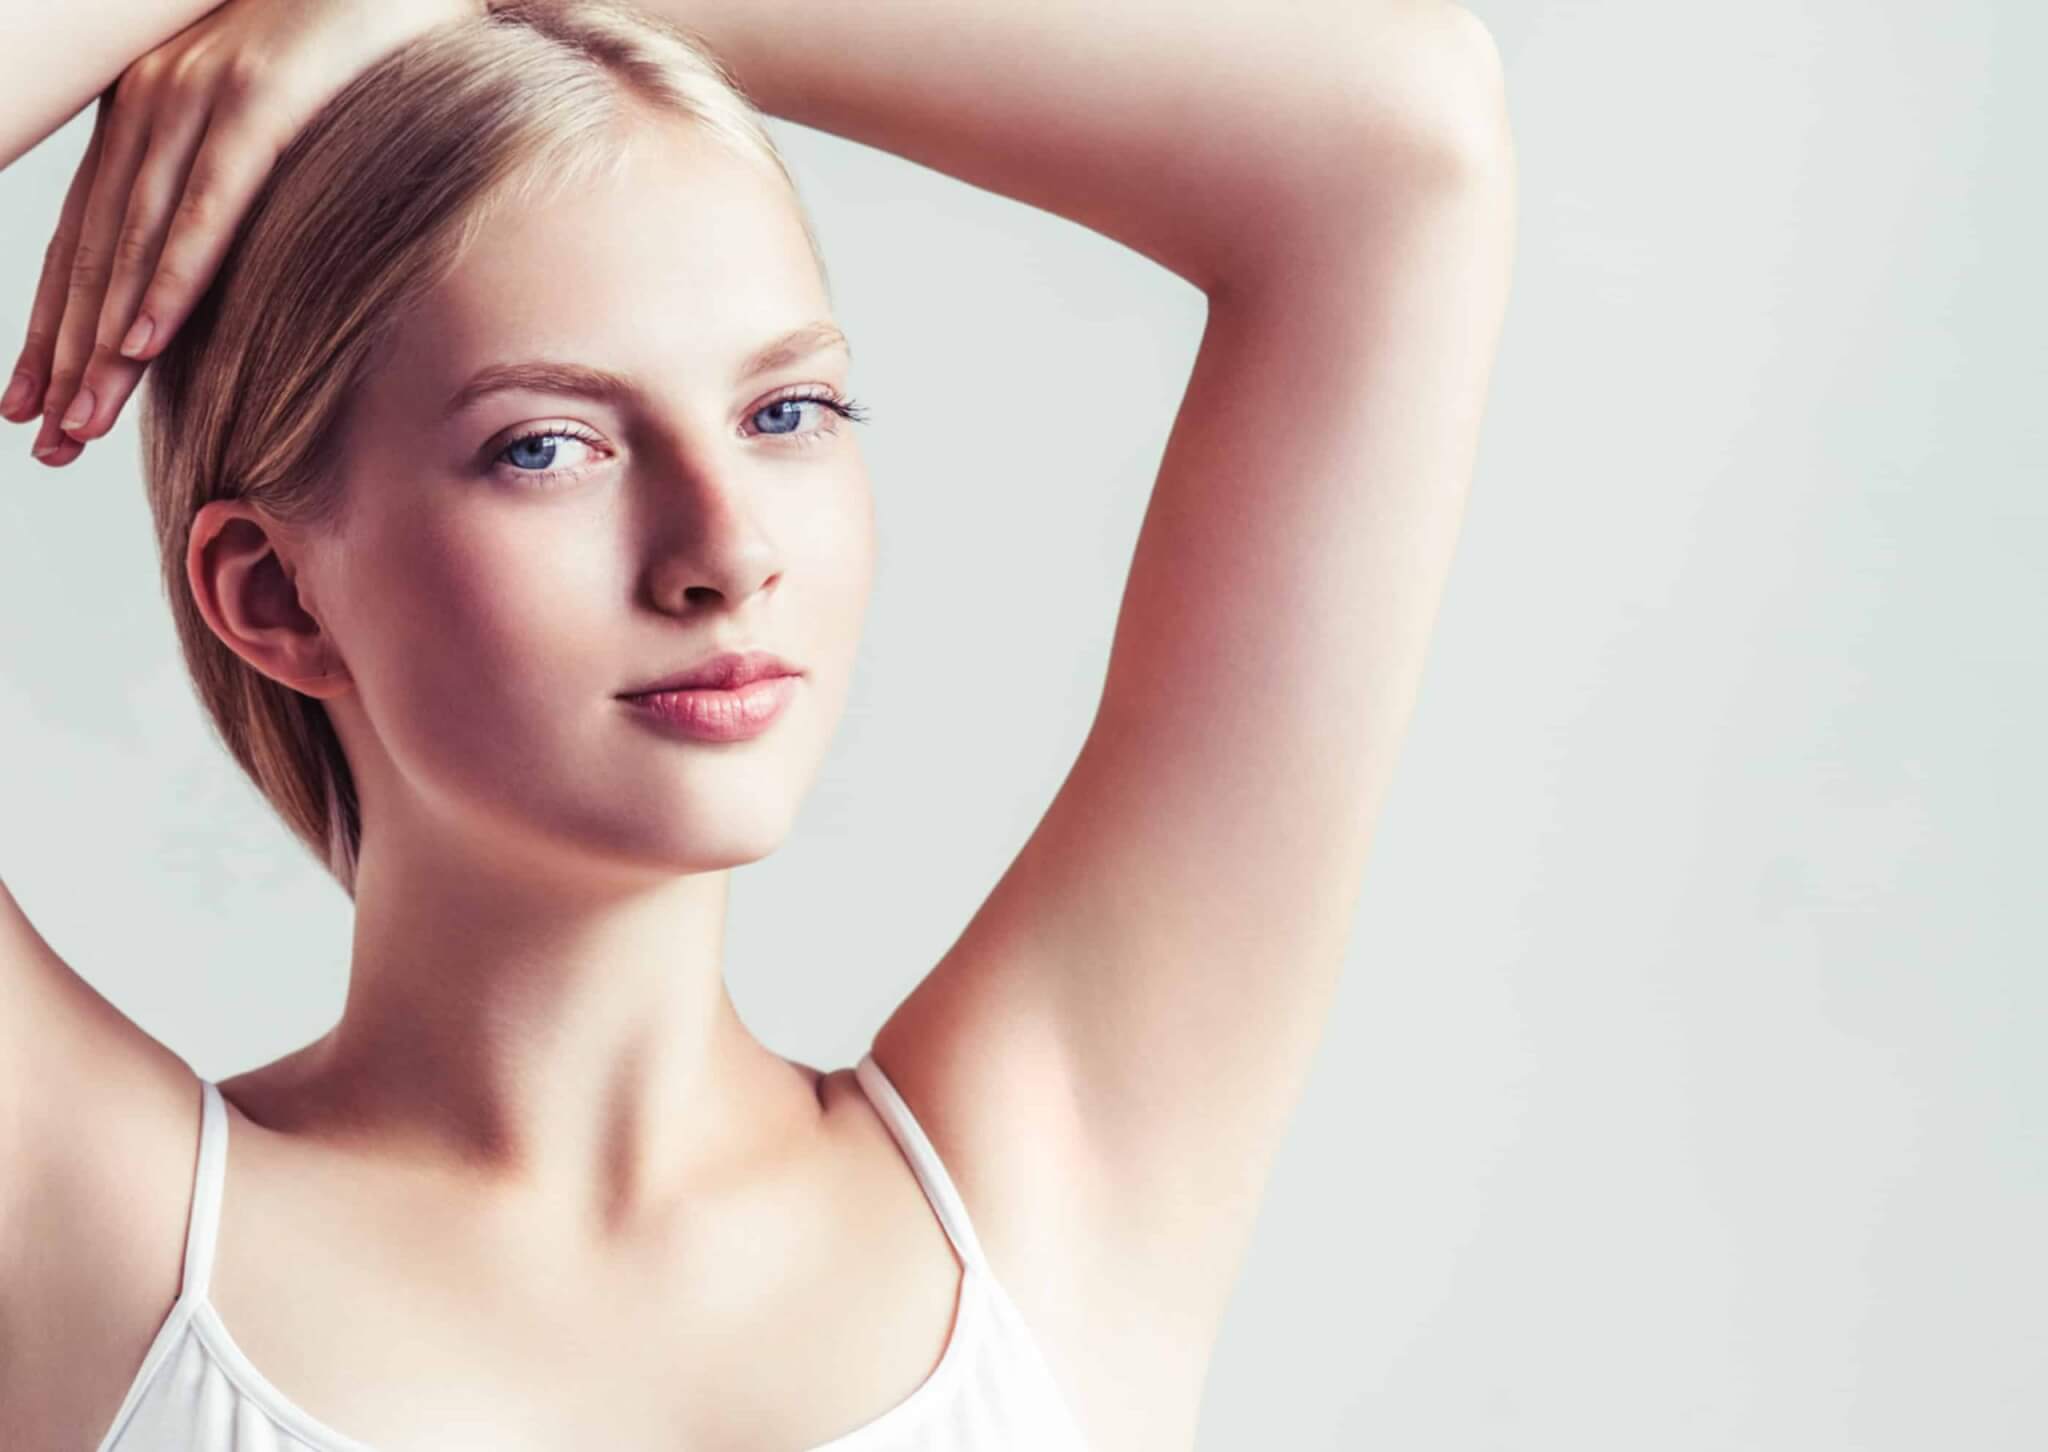 Laser Hair Removal underarms in a woman